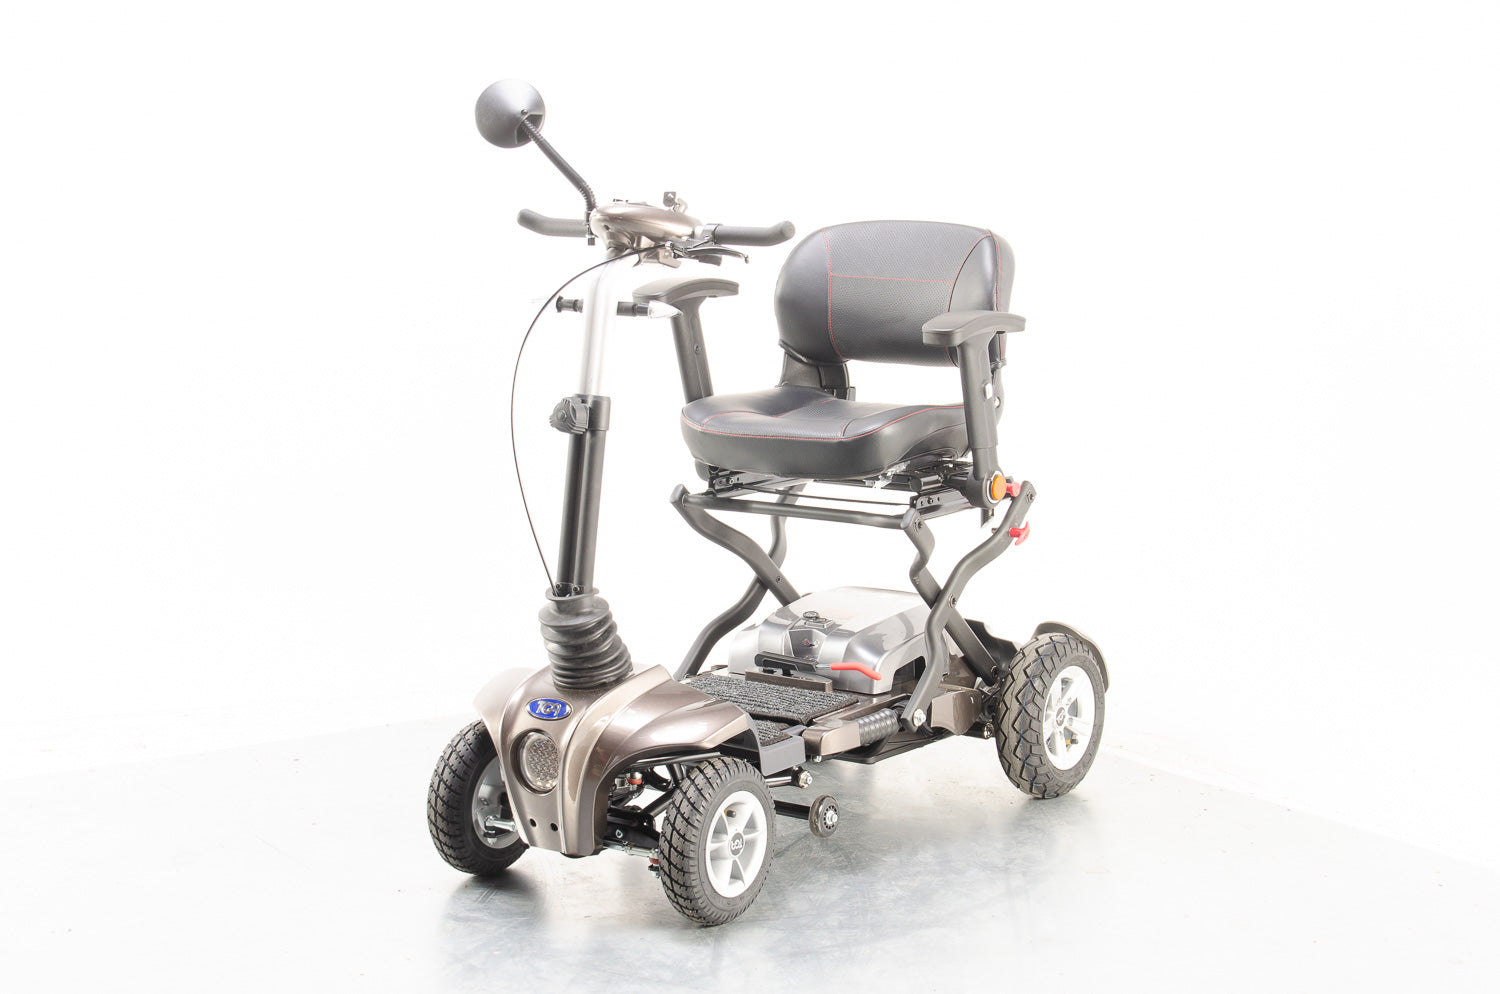 TGA Maximo Plus Used Mobility Scooter 4mph Folding Lithium Pneumatic Suspension bronze